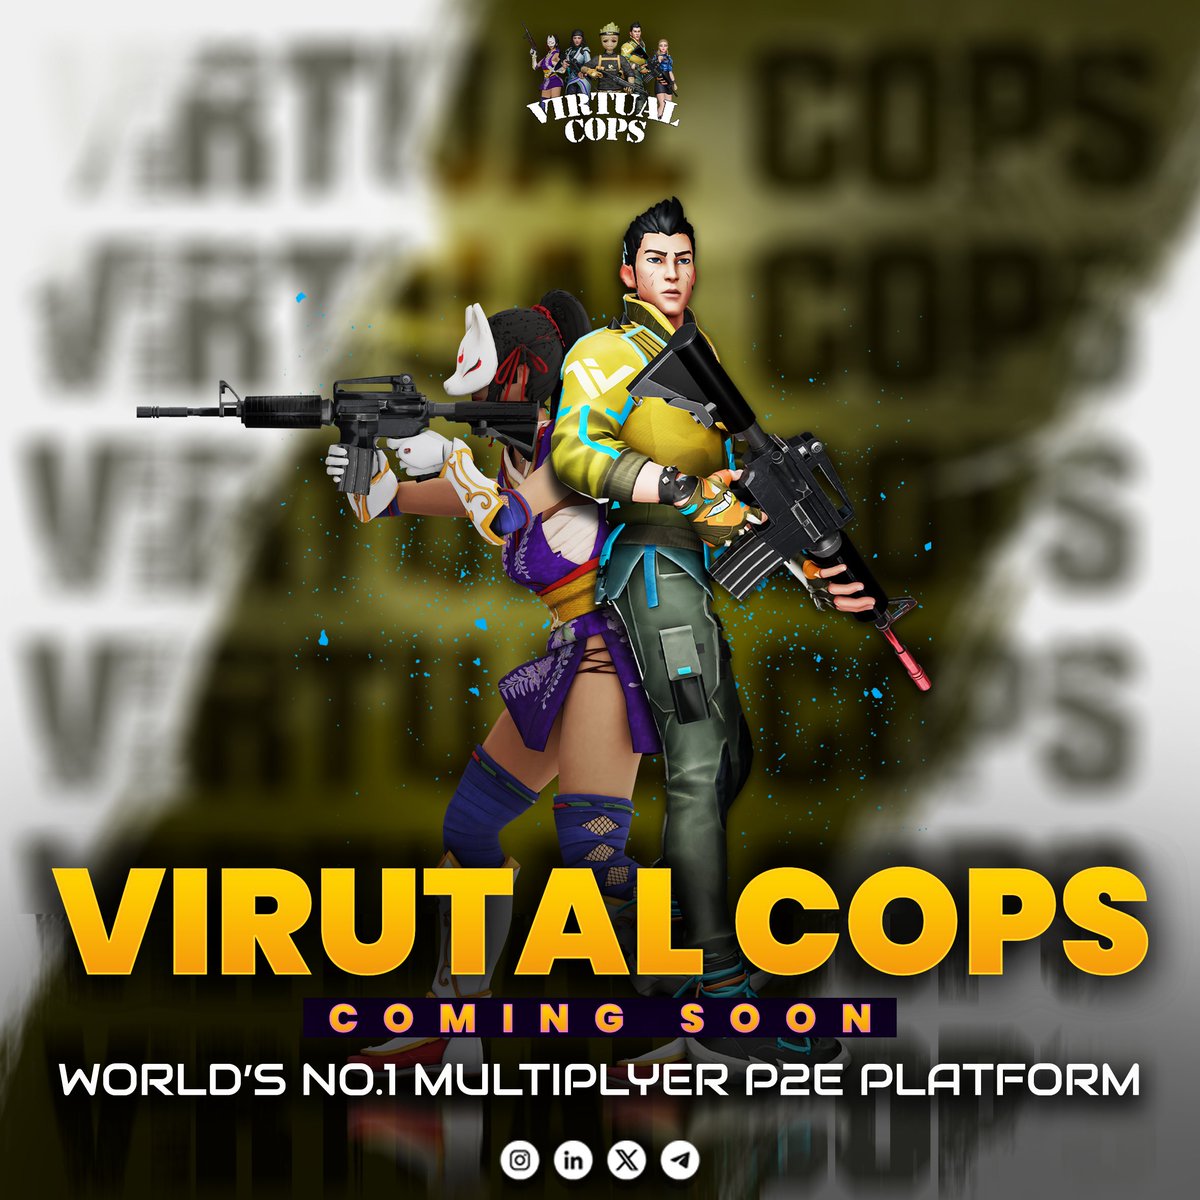 You know the P2E gaming adventure is almost here! Virtual Cops, the #1 multiplayer game, is arriving soon.

#PlayToWin #GamingCommunity #StayUpdated #VirtualCops #Gaming #virtualgame #virtualcope #download #install #vrcsuccess #vrc #vzoneworld #vrccoin #bitcoin #crypto